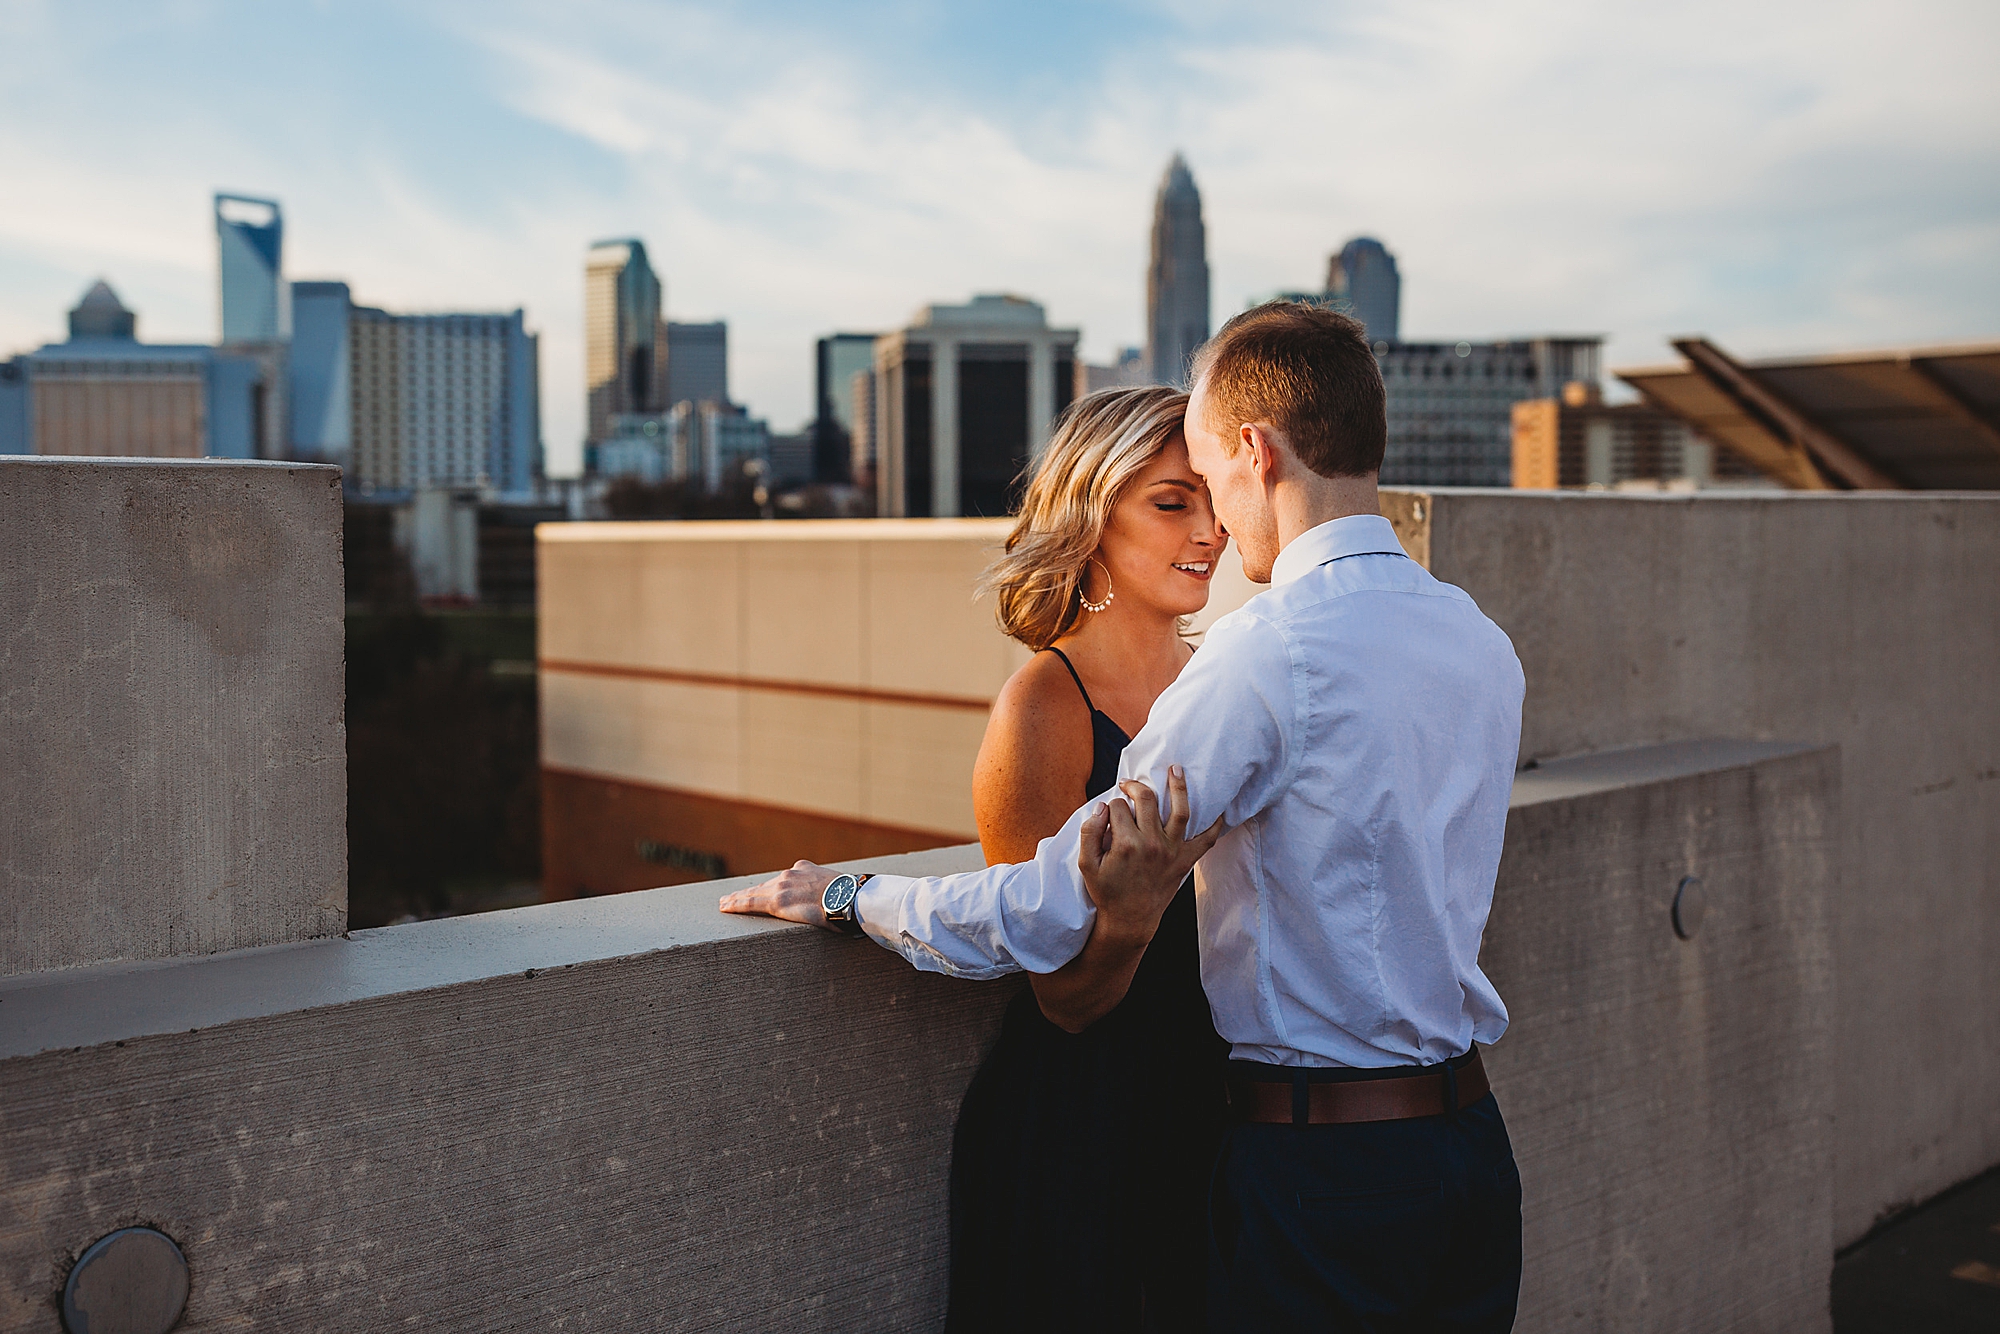 downtown Charlotte: NC engagement photographer